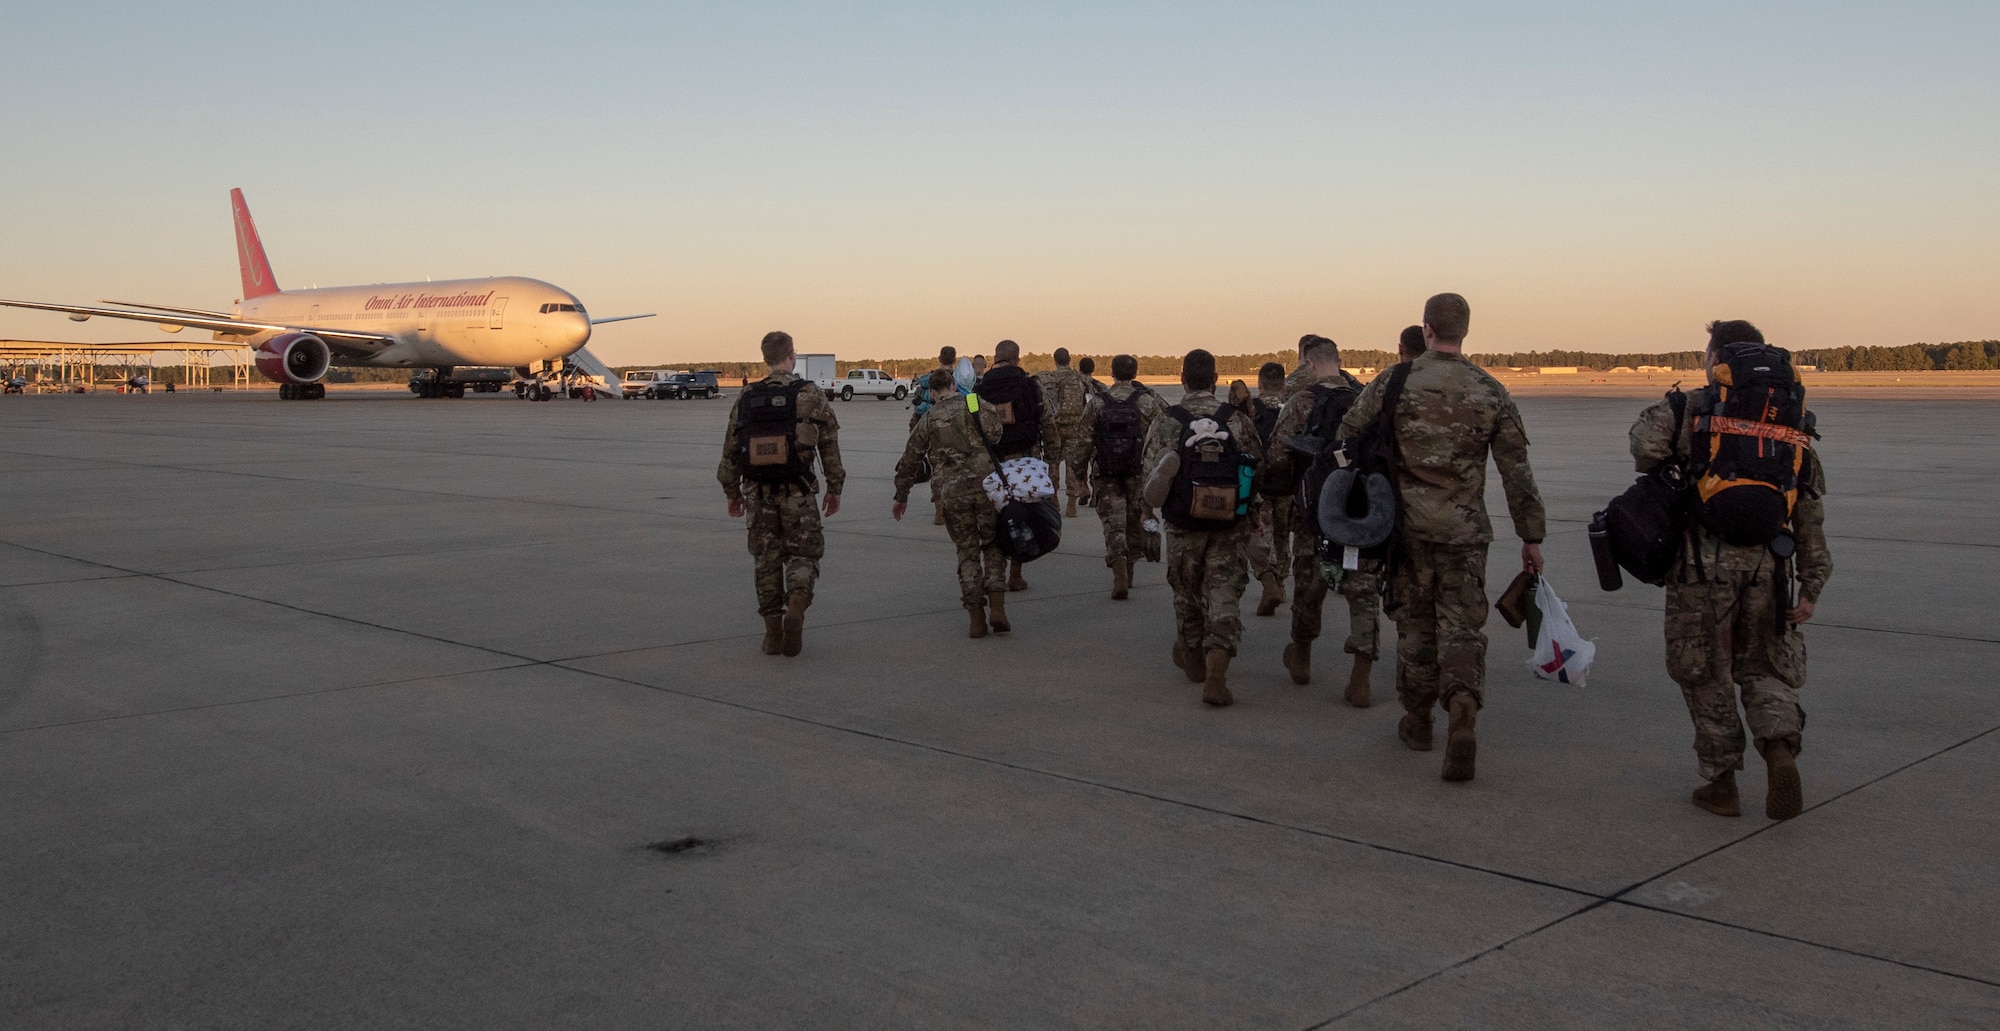 Members of the 79th Aircraft Maintenance Unit (AMU) walk towards a commercial aircraft on the flight line at Shaw Air Force Base (AFB), South Carolina, Oct. 17, 2019.